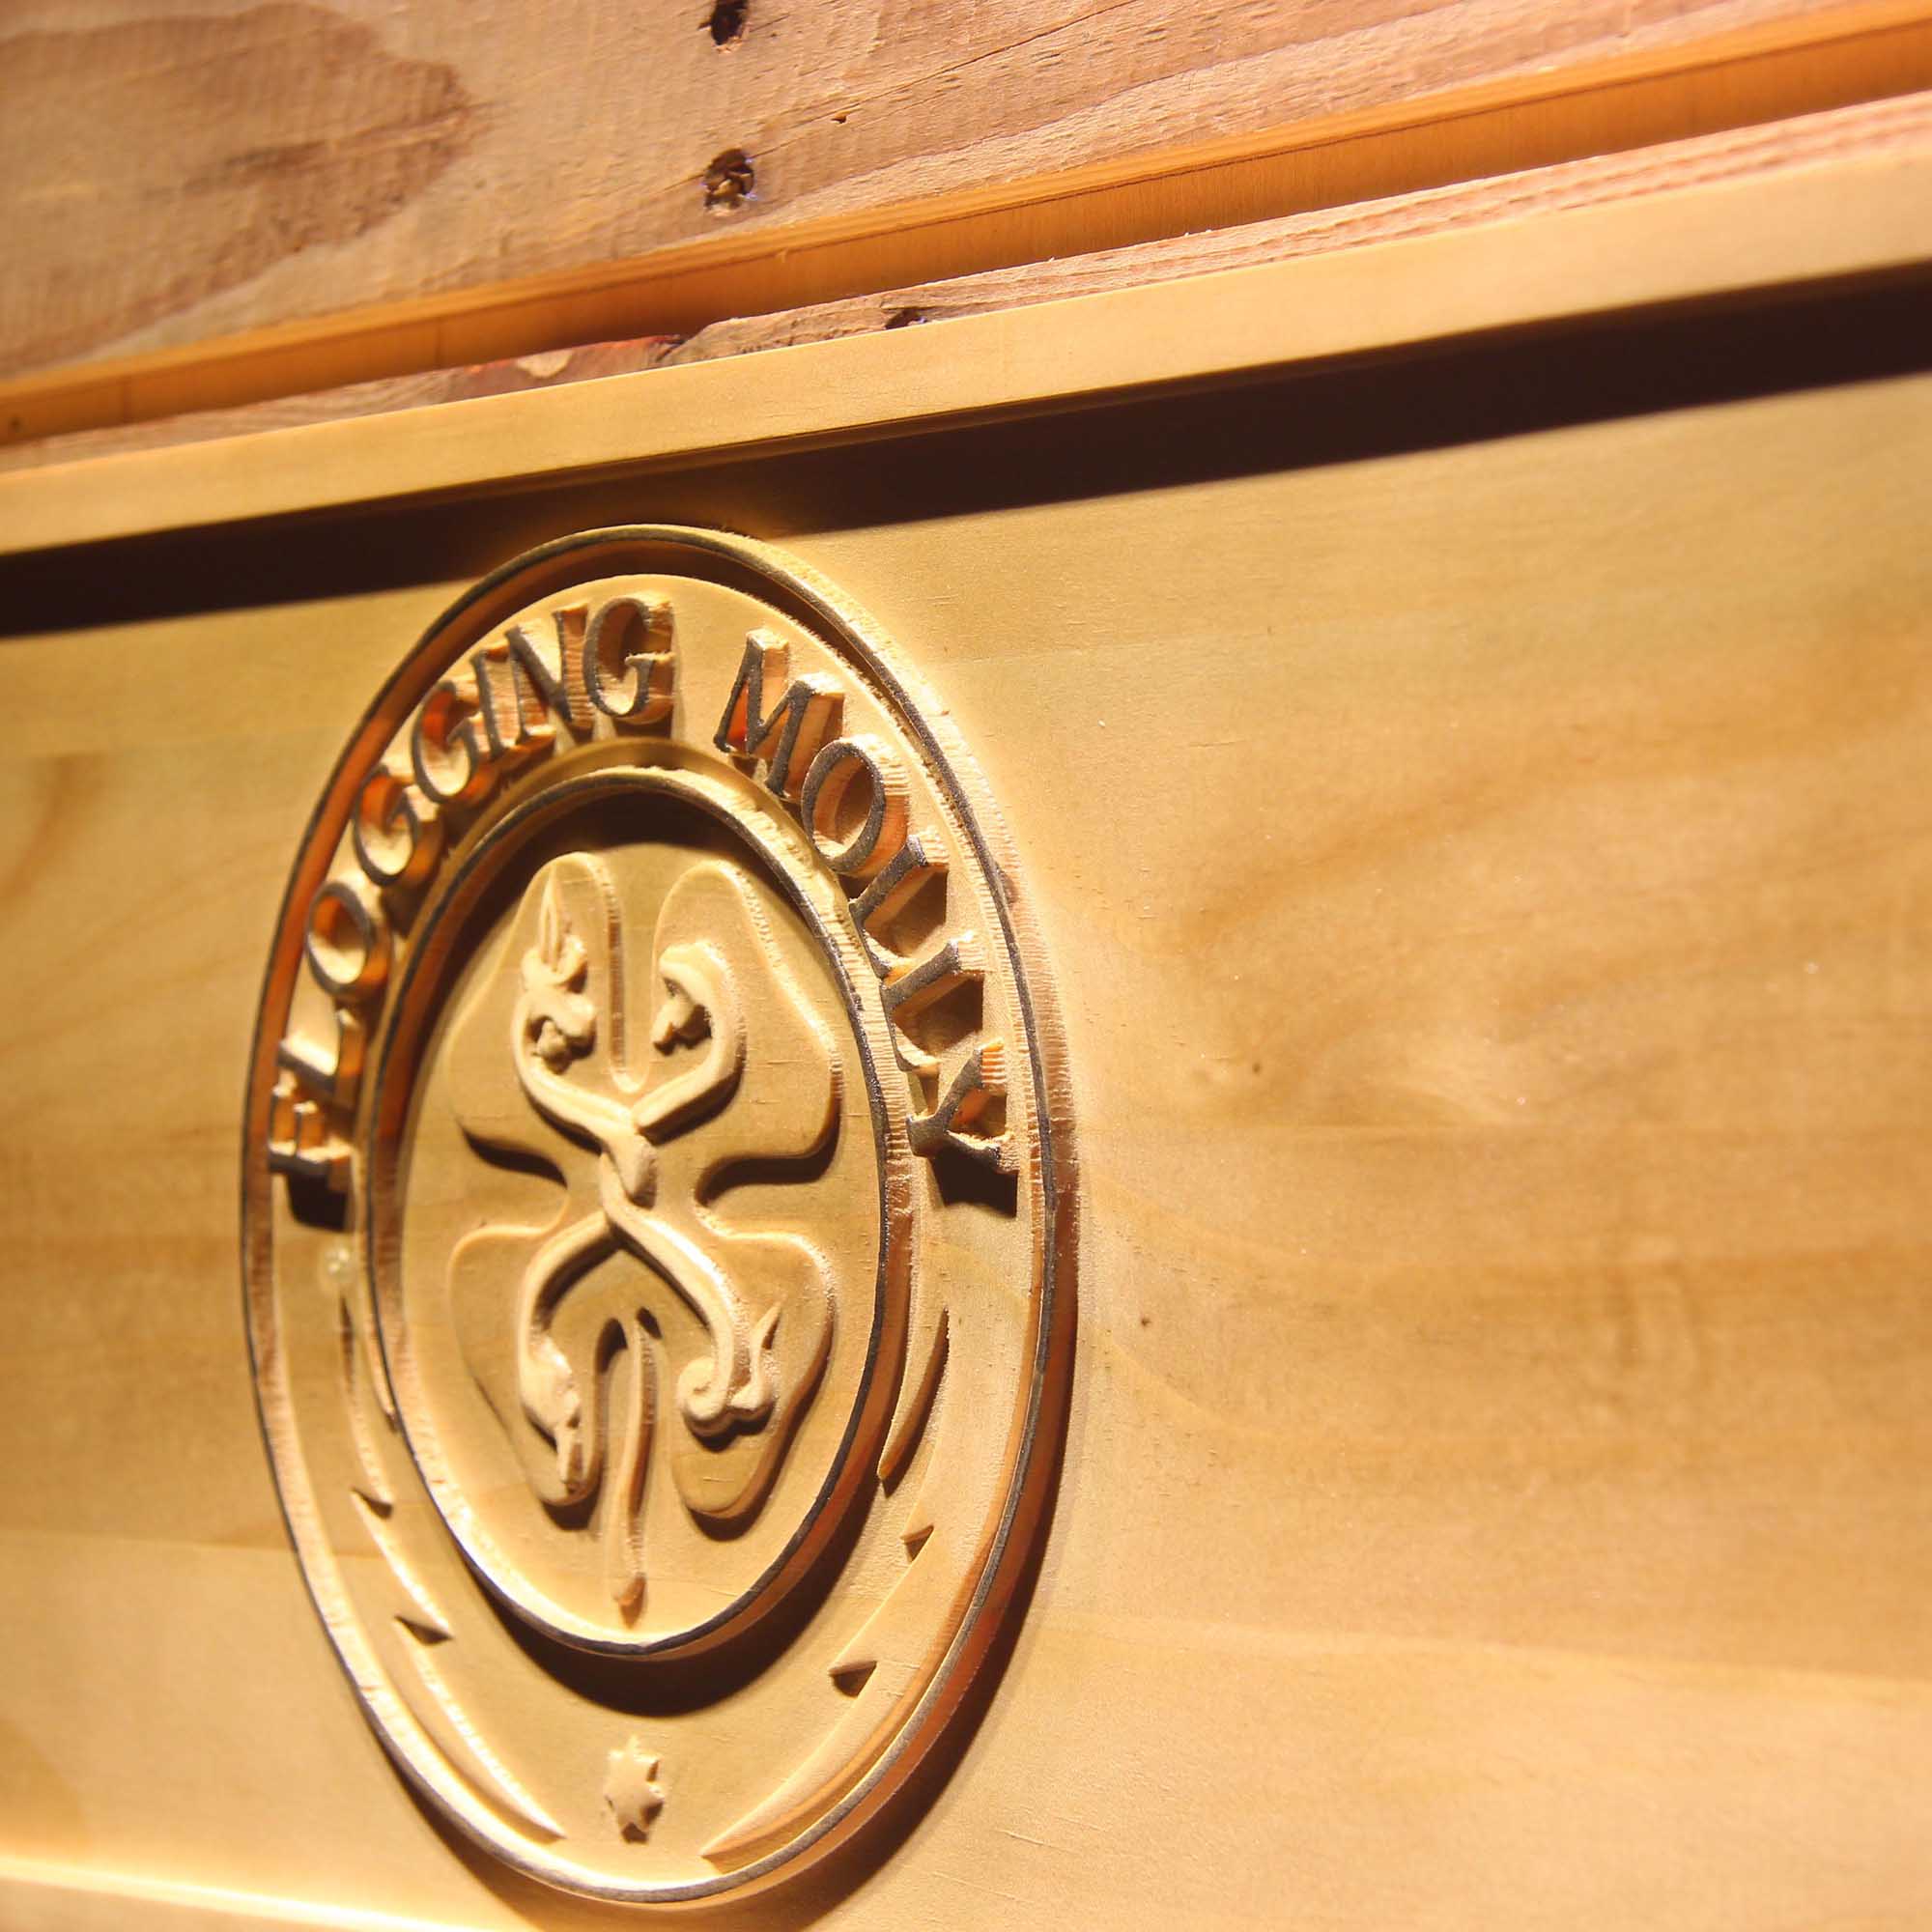 Flogging Molly Band 3D Wooden Engrave Sign